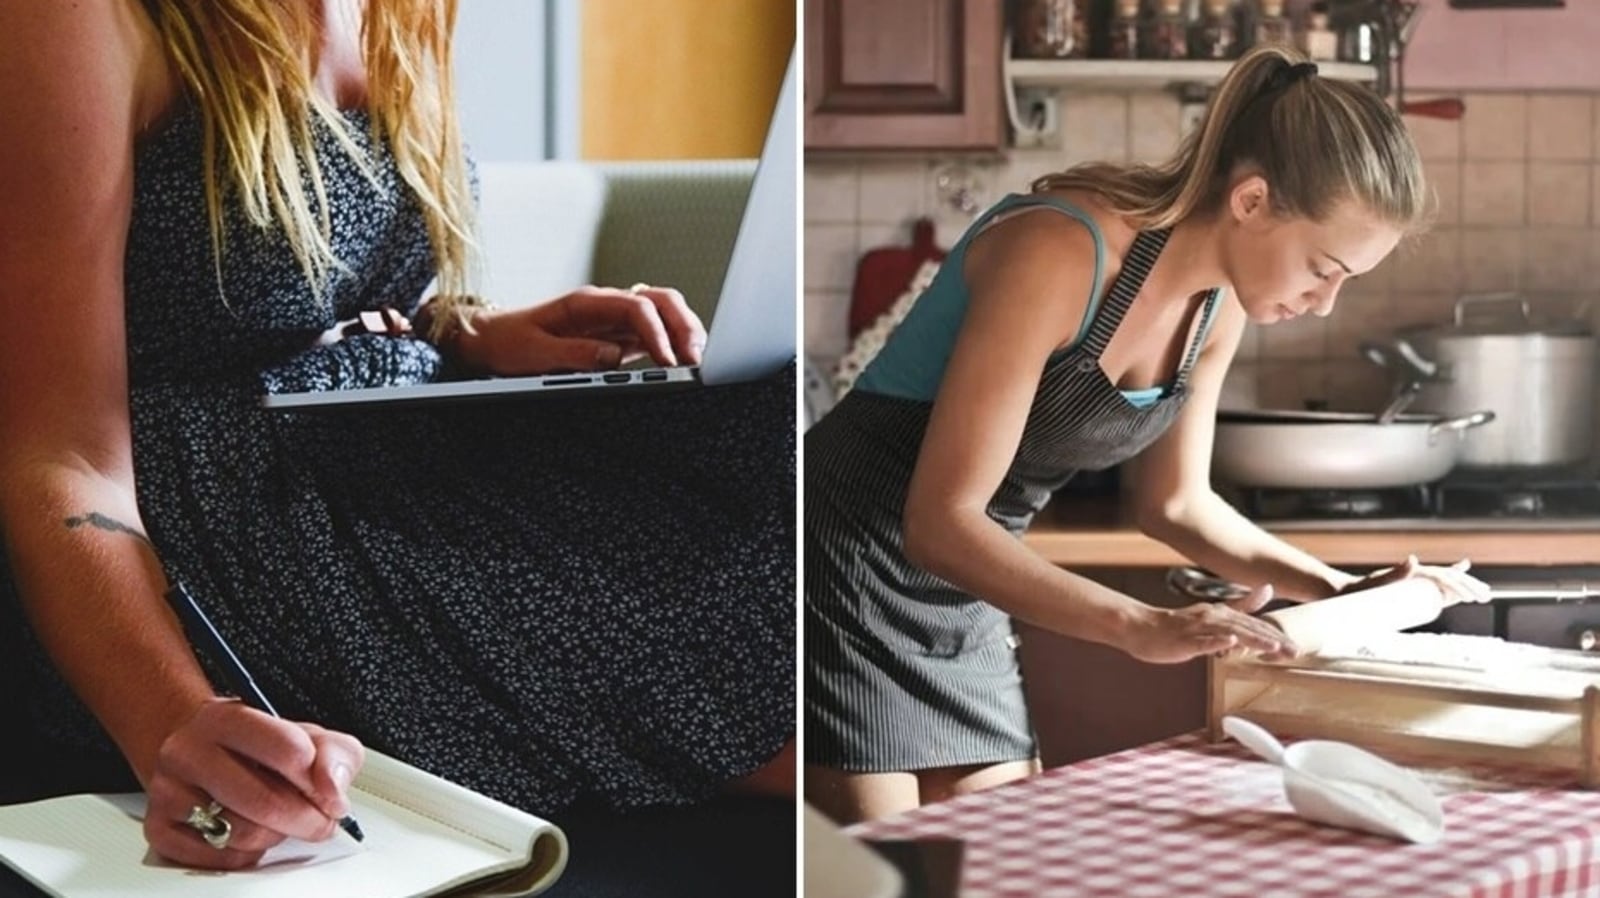 Working woman vs housewife; is one more stressed than the other? Experts answer Health image